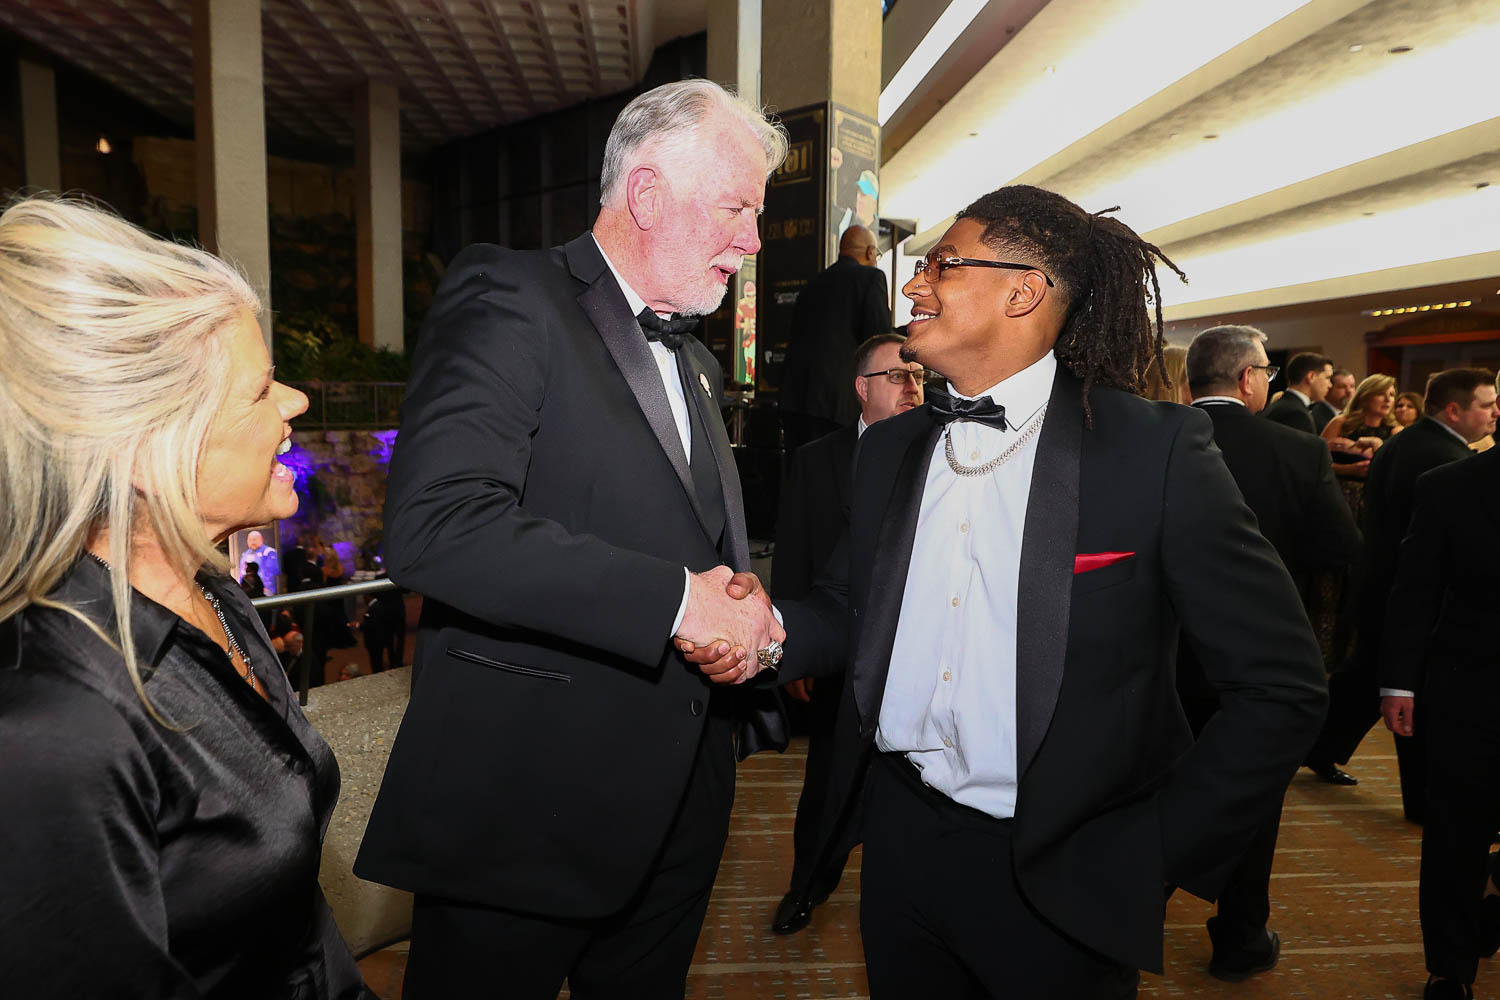 Former Chiefs player Dave Lindstrom with Mack Lee Hill Award recipient Kansas City Chiefs running back Isiah Pacheco during the 53rd annual 101 Awards at The Westin Crown Center in Kansas City, Missouri on Saturday, February 25, 2023.